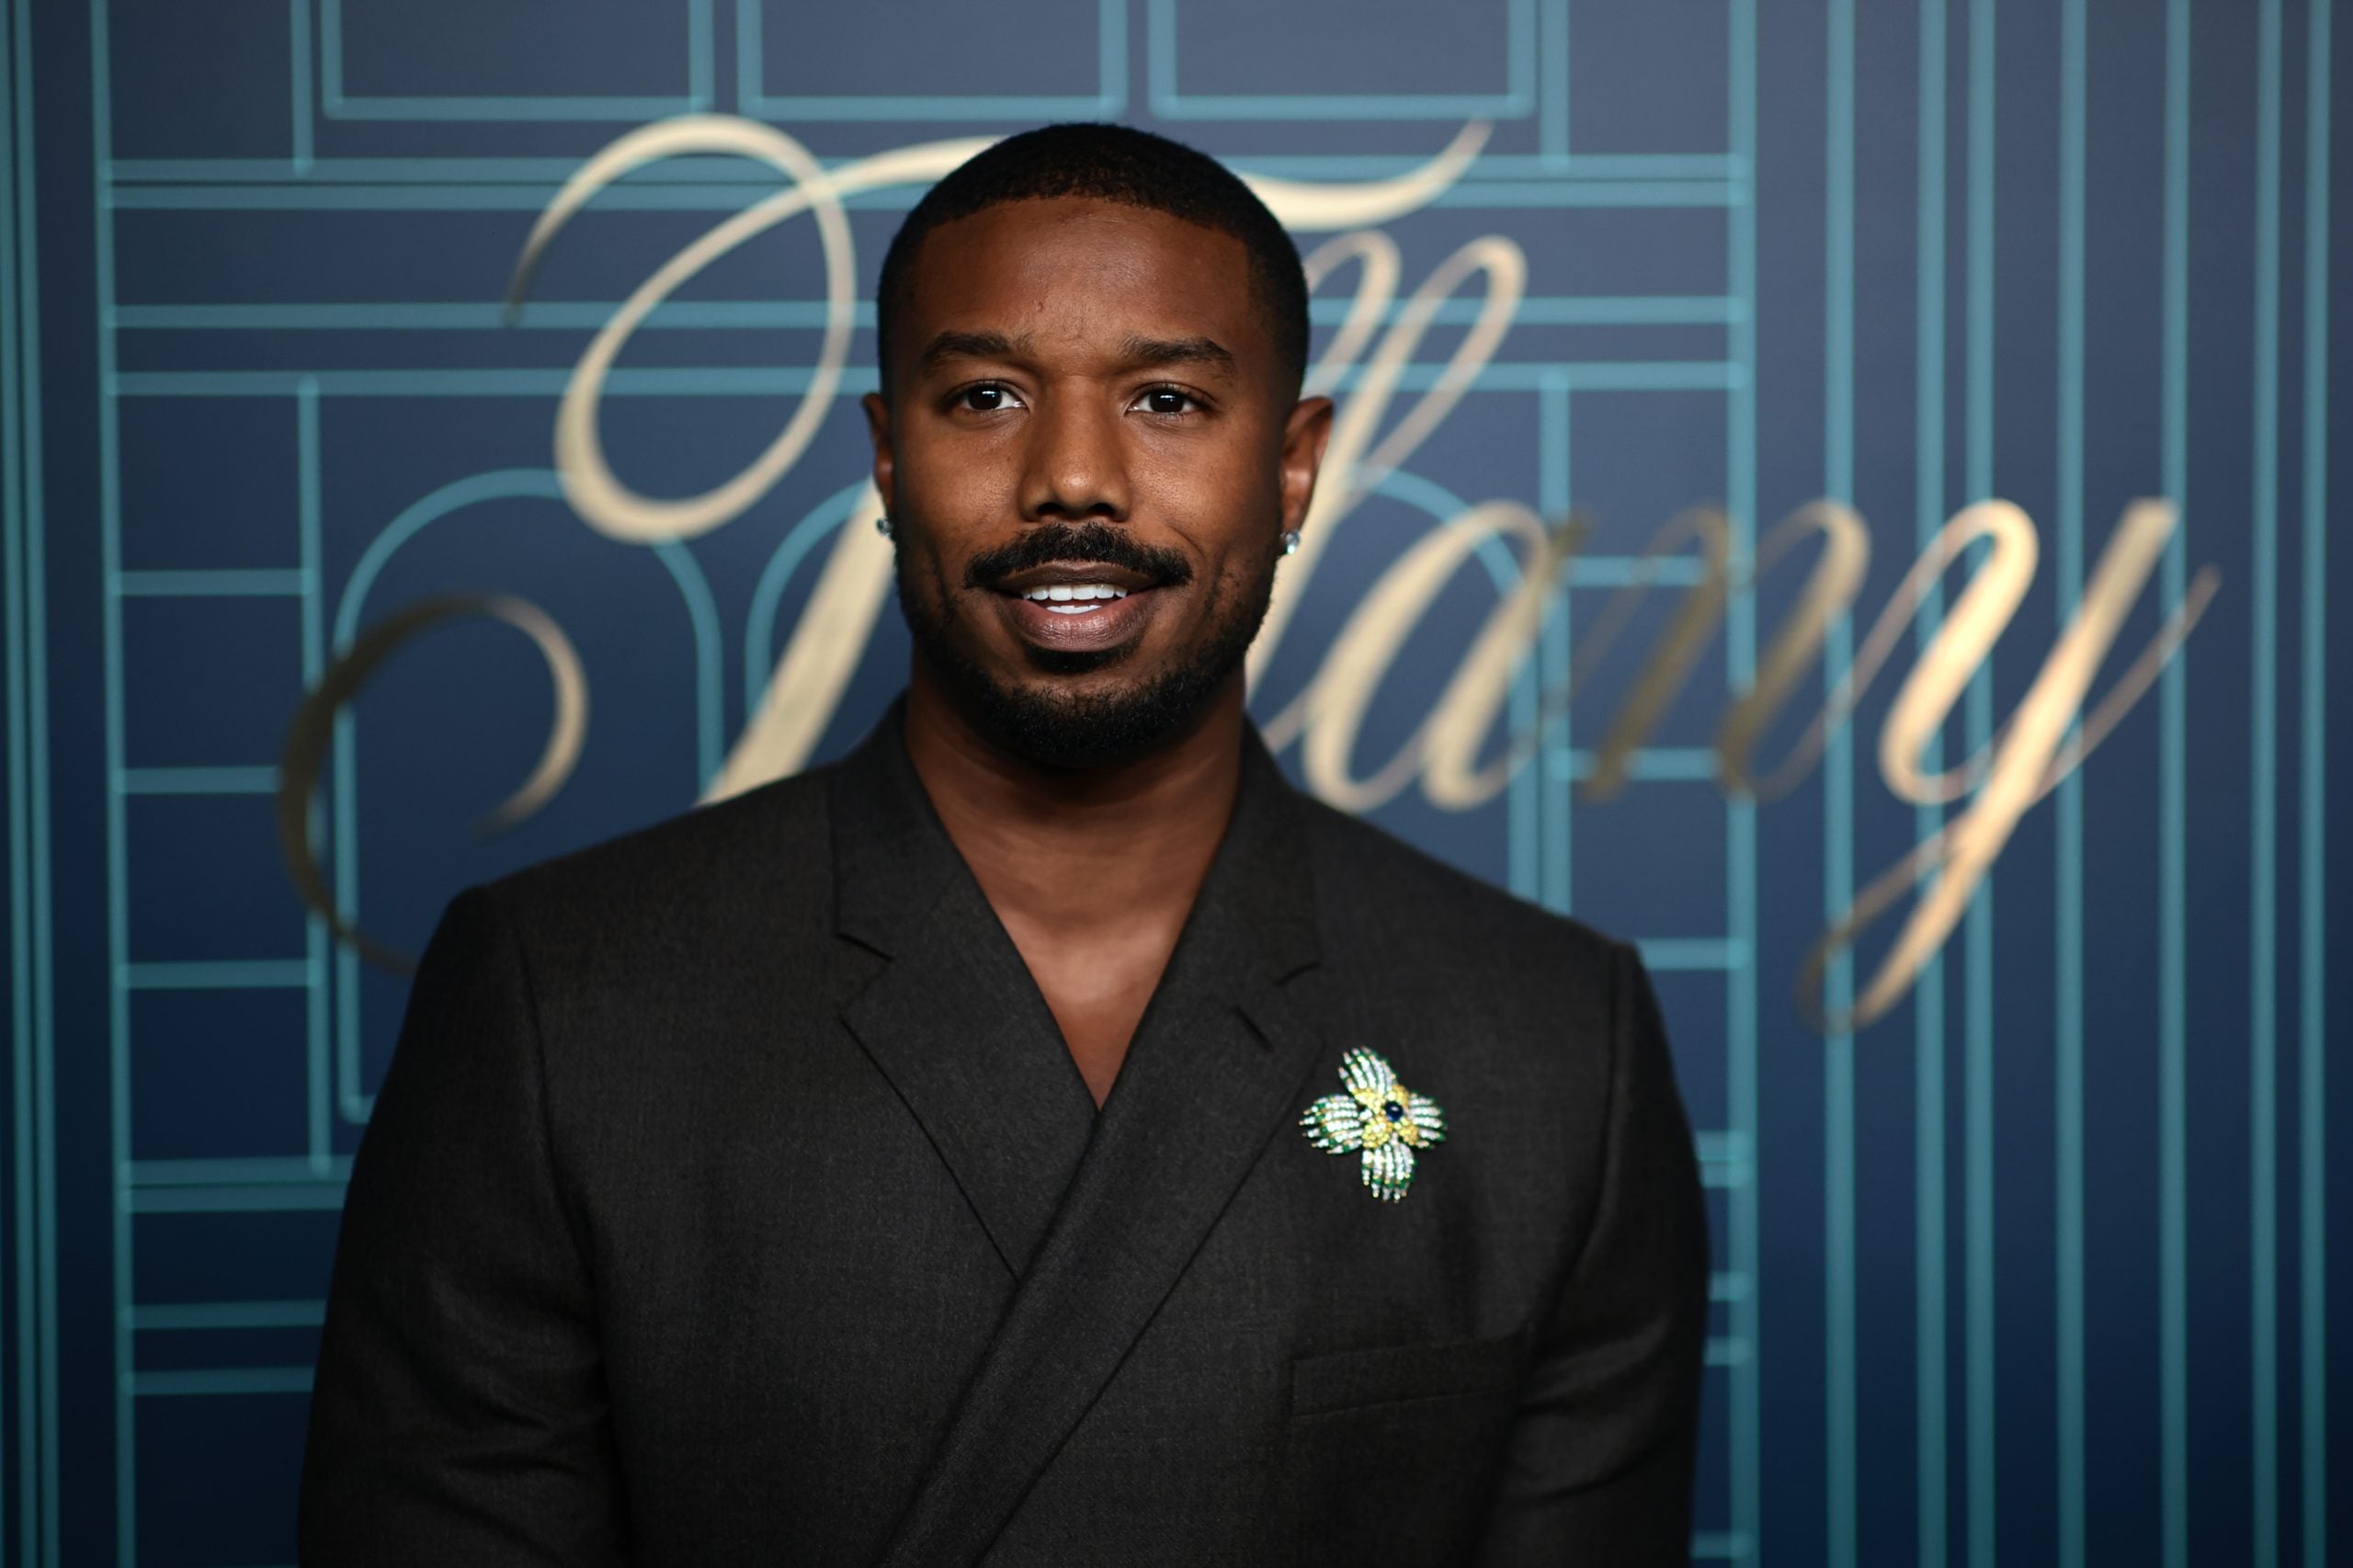 Michael B. Jordan Is Now One Of The Few Black Owners Of A Formula 1 Car Racing Team